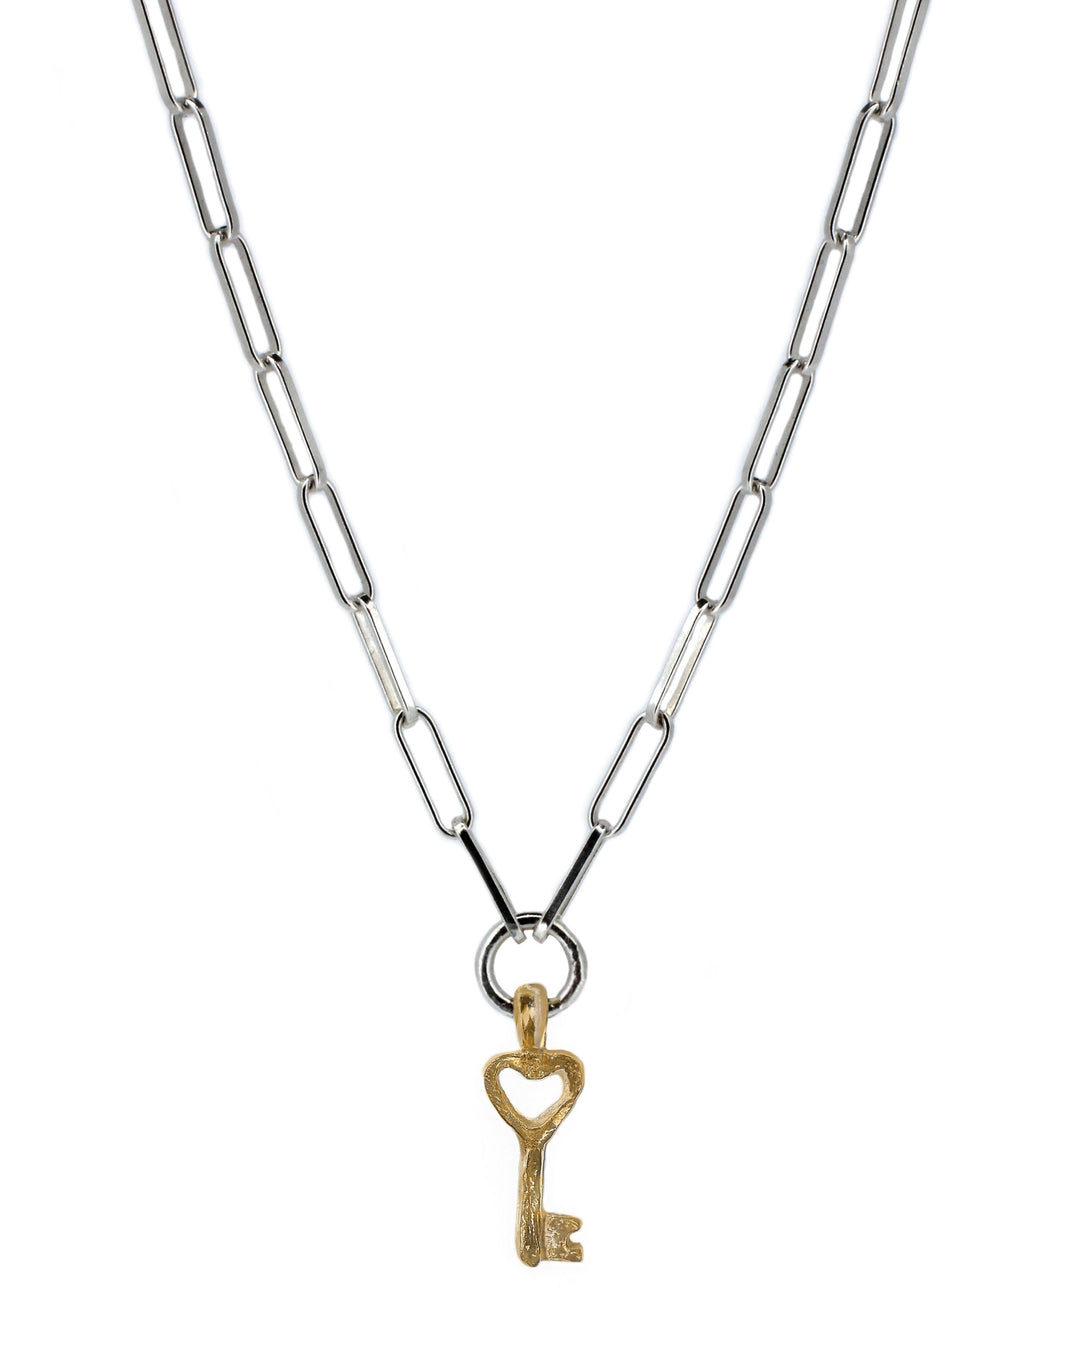 Gold Love Lock Trace Chain Necklace